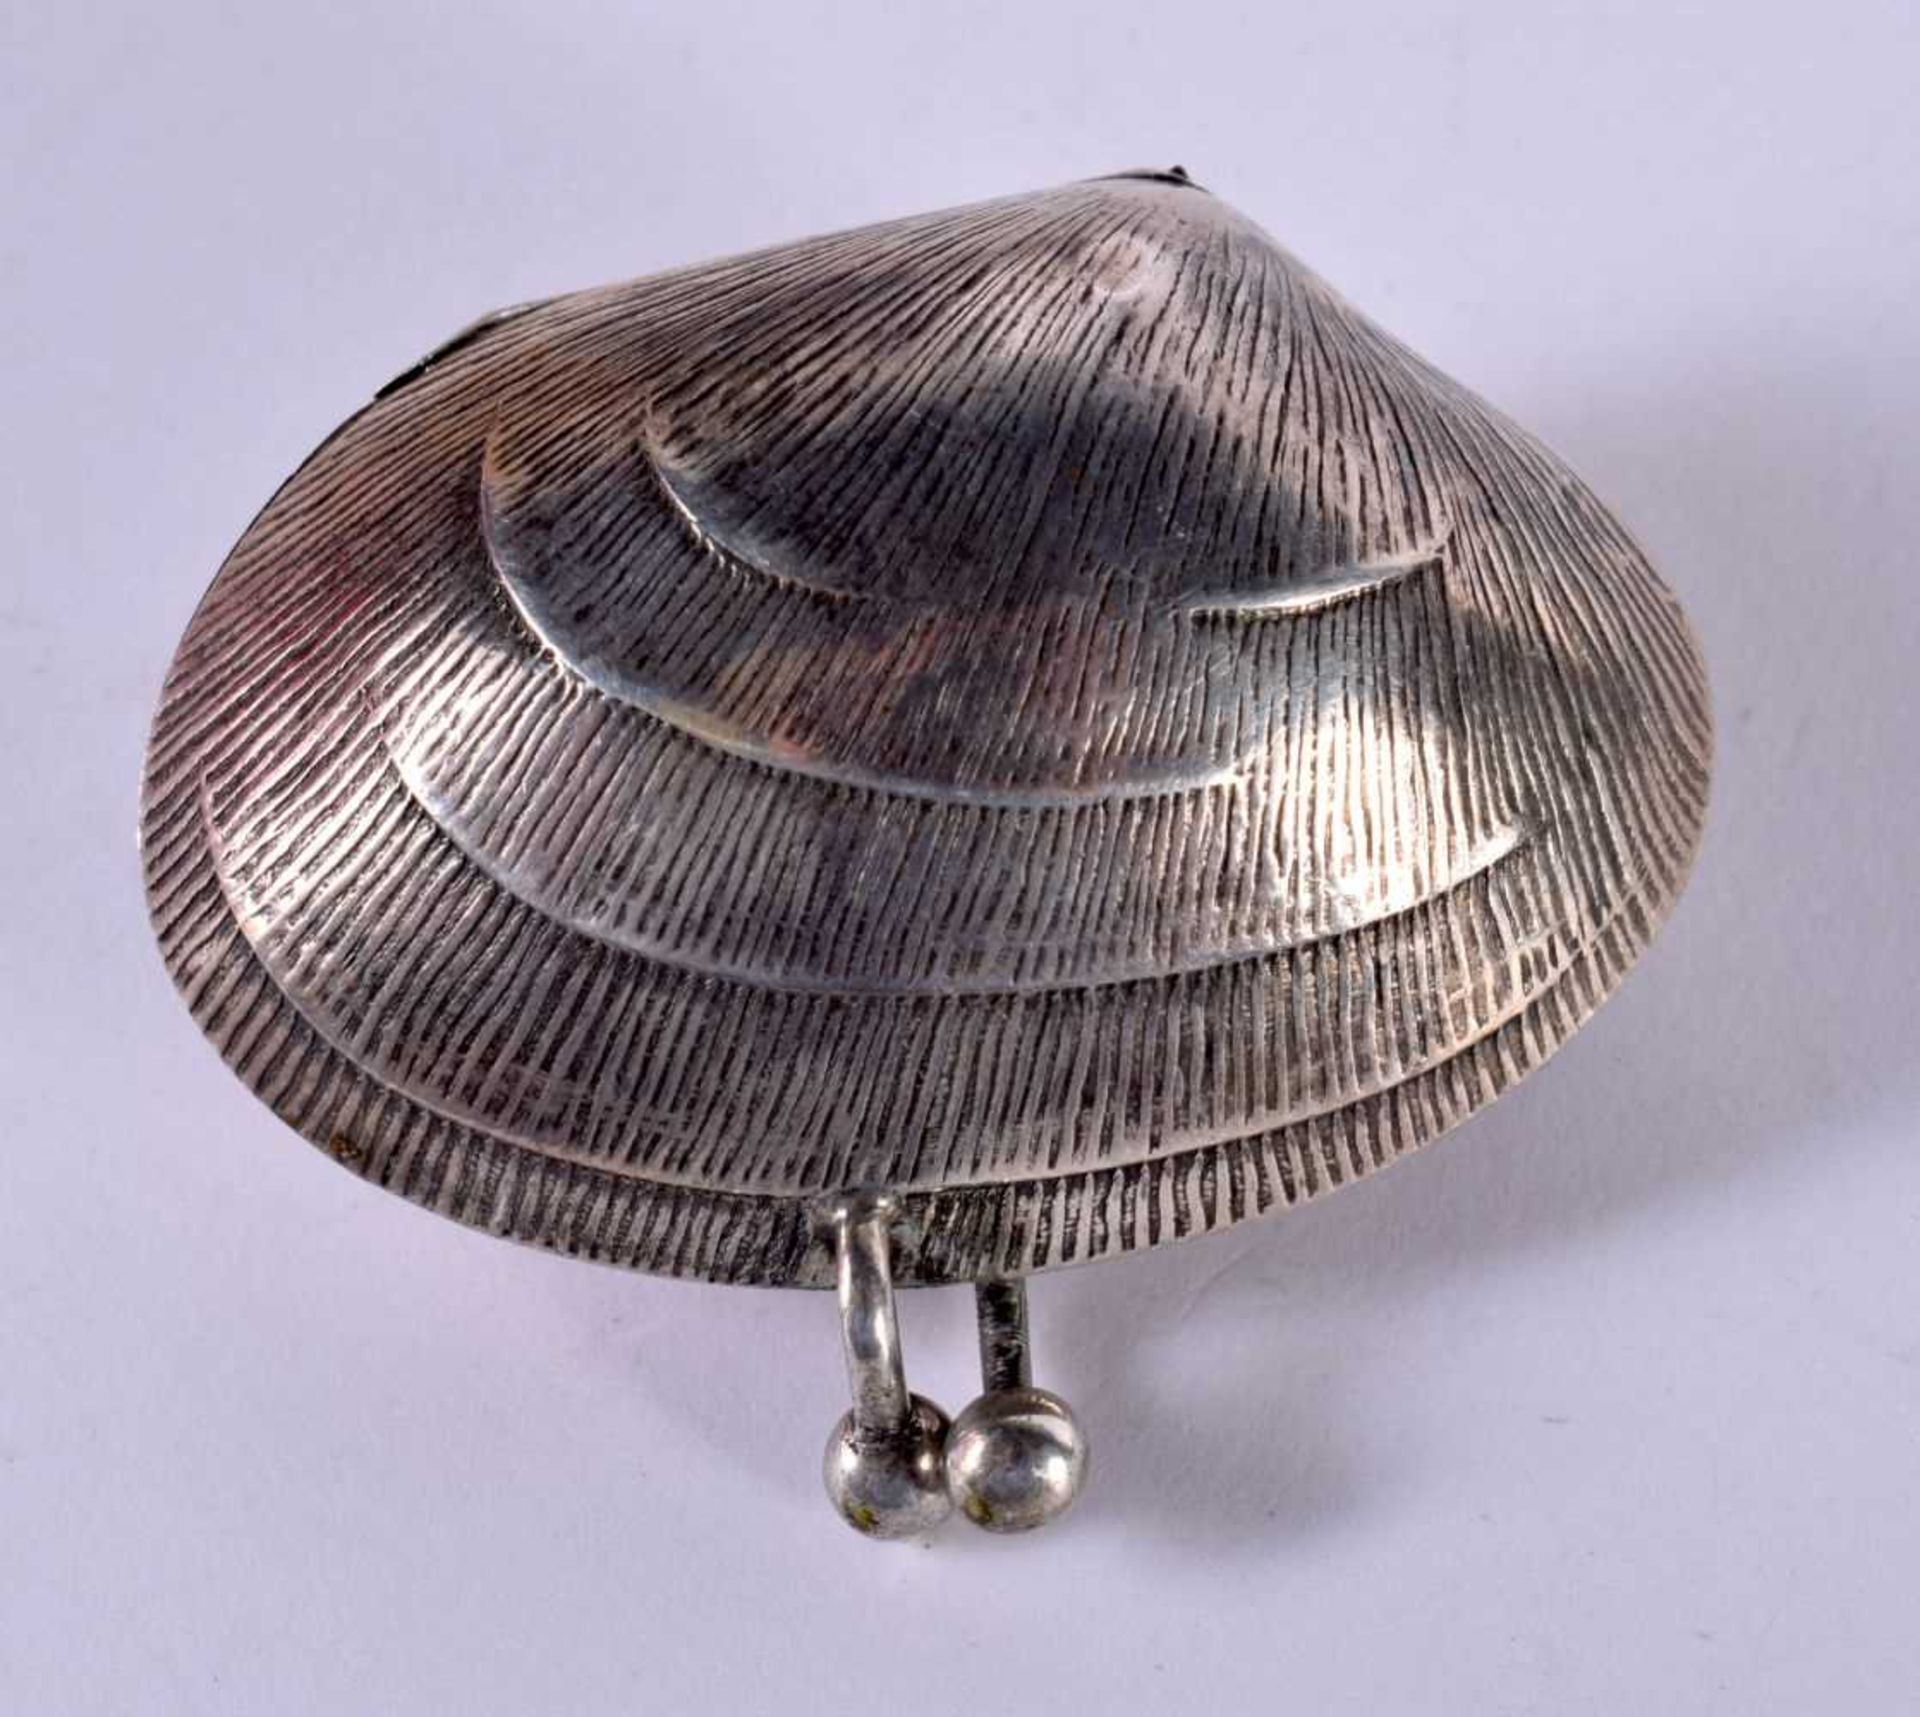 A CONTINENTAL SILVER SNUFF BOX WITH GILT INTERIOR IN THE FORM OF A CLAM SHELL. 2.6 cm x 5.4cm x 4. - Image 2 of 4